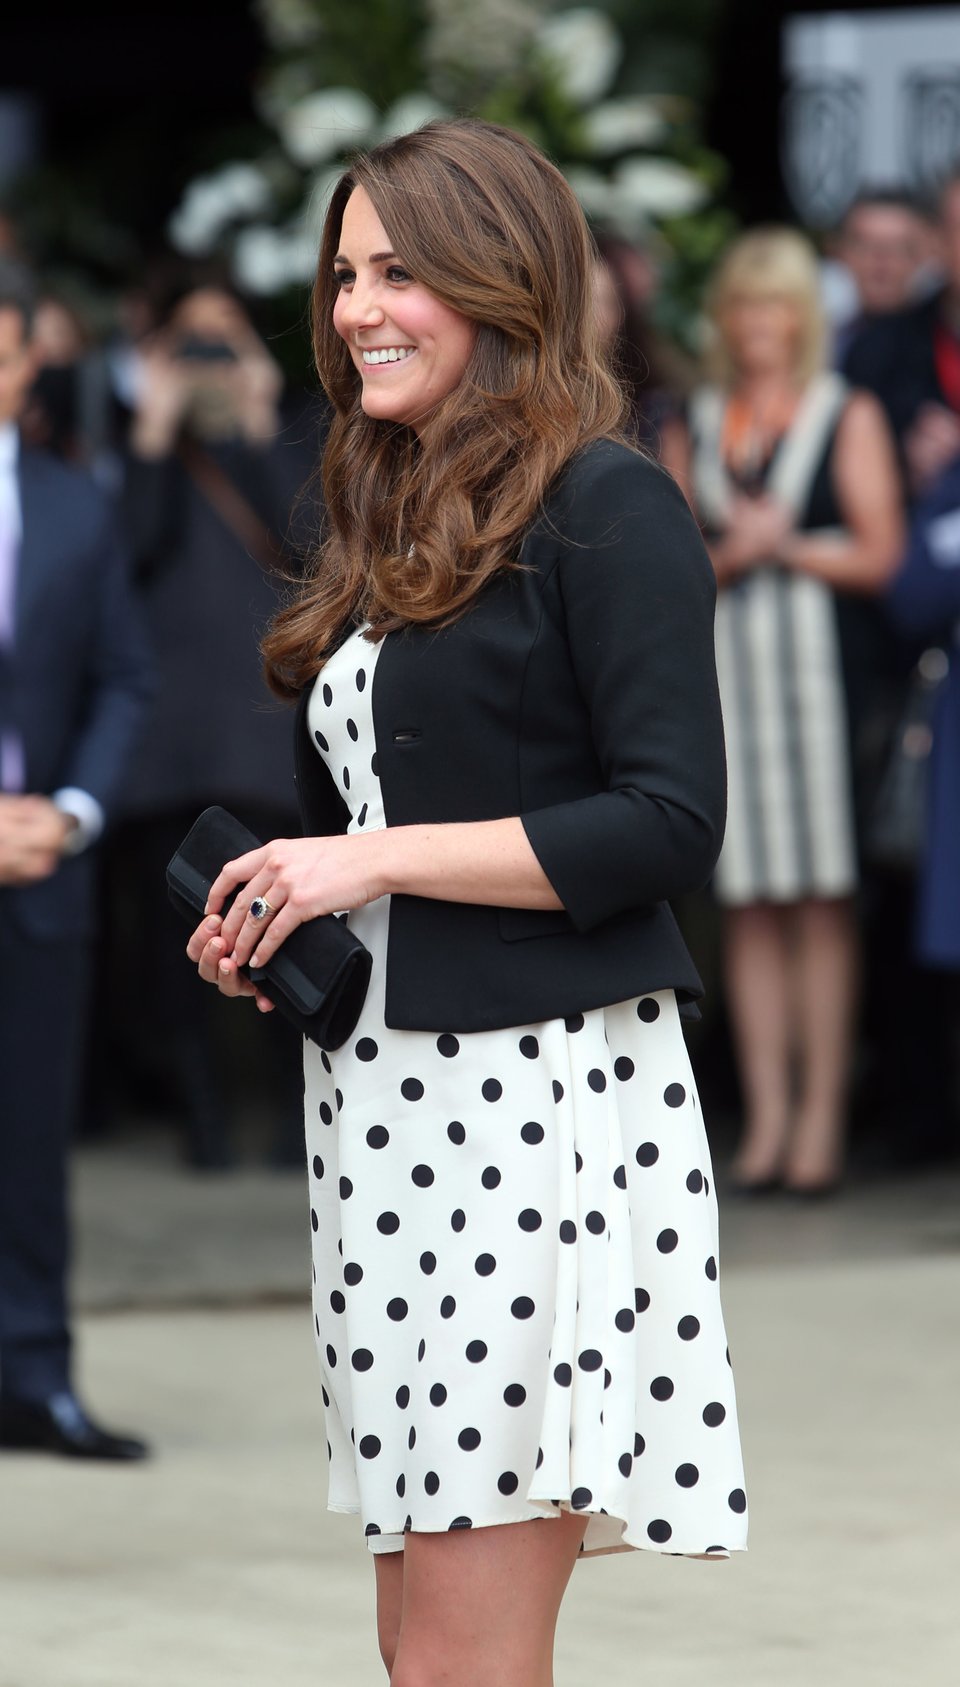 The Duchess of Cambridge arrives for her visit to Warner Bros studios in Leavesden, Herts where the popular Harry Potter movies were produced.